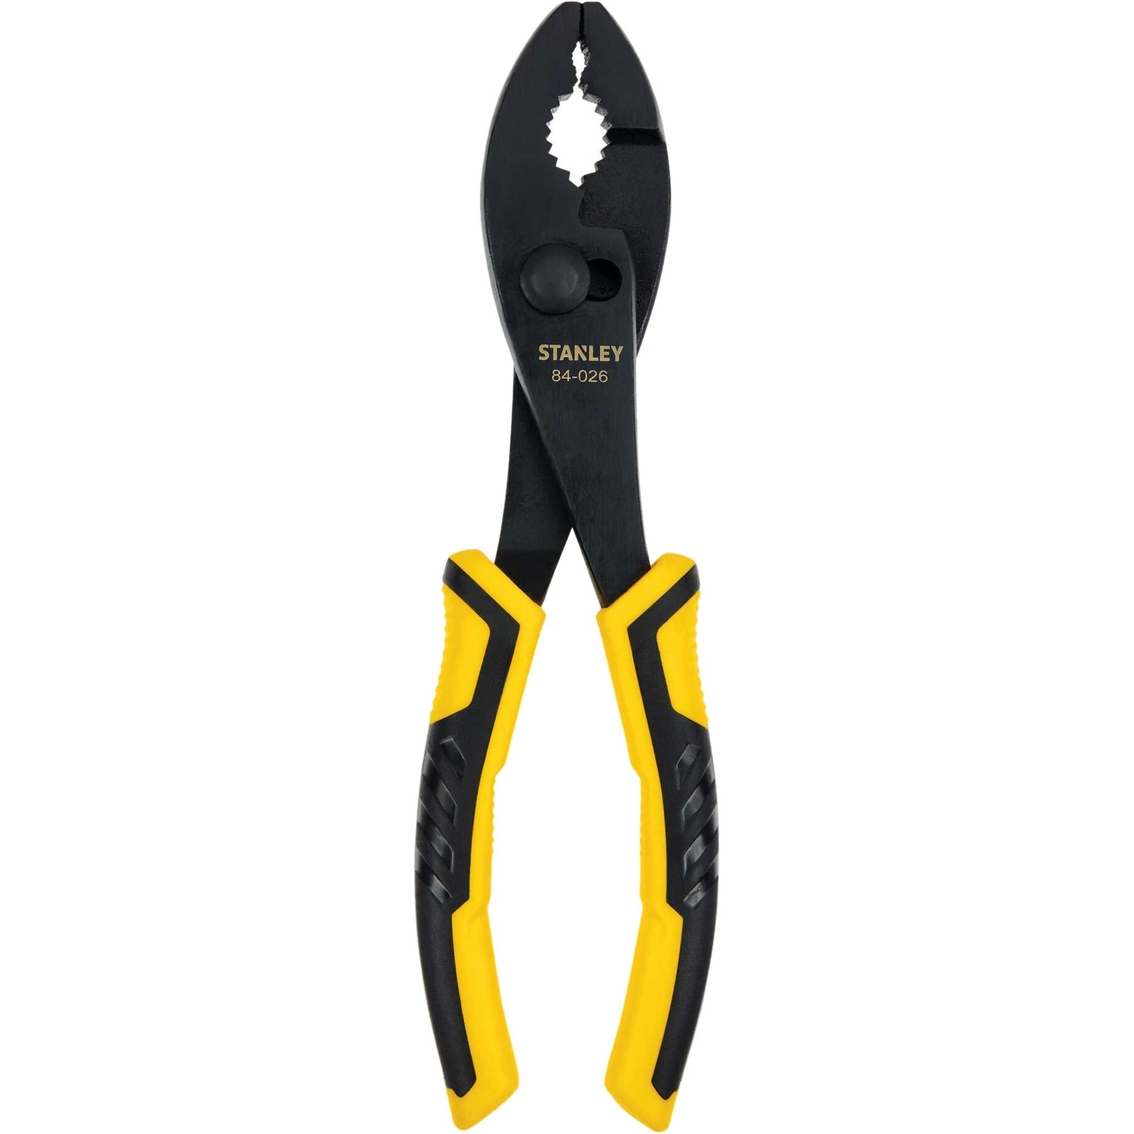 Stanley 8 in. Slip Joint Pliers - Image 3 of 3